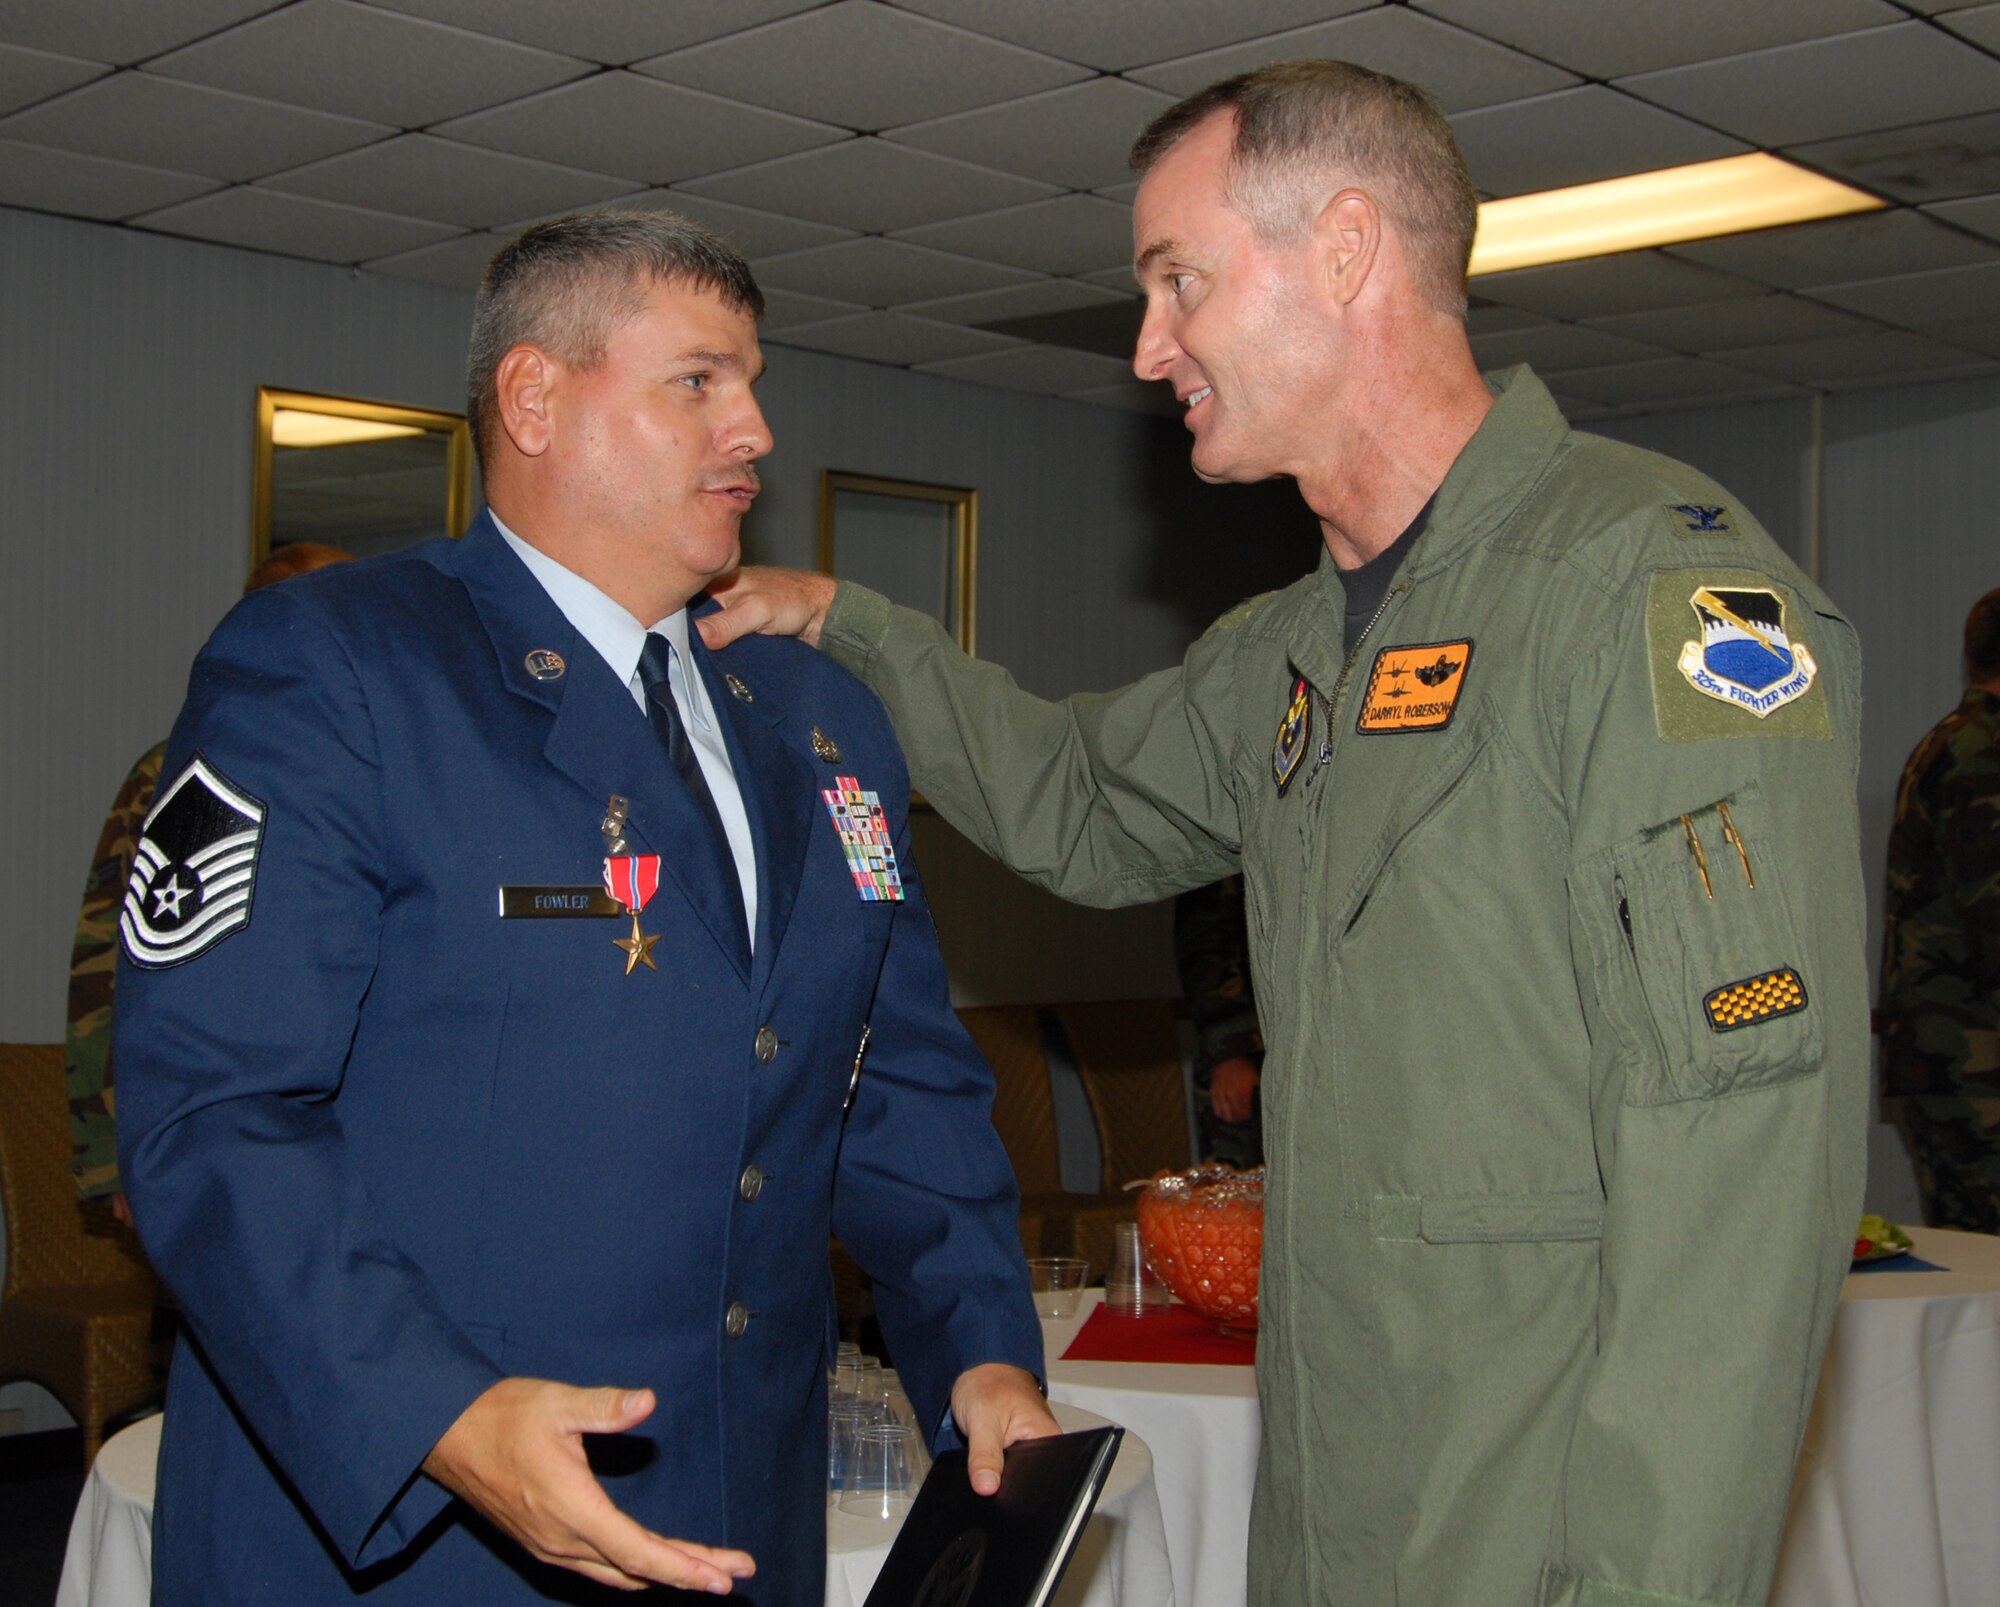 Col. Darryl Roberson, 325th Fighter Wing commander, congratulates Master Sgt. Michael Fowler, 325th Civil Engineer Squadron fire protection specialist, for earning the Bronze Star Medal for meritorious achievement during his time in Afghanistan.  (US Air Force photo by Susan Trahan) 

